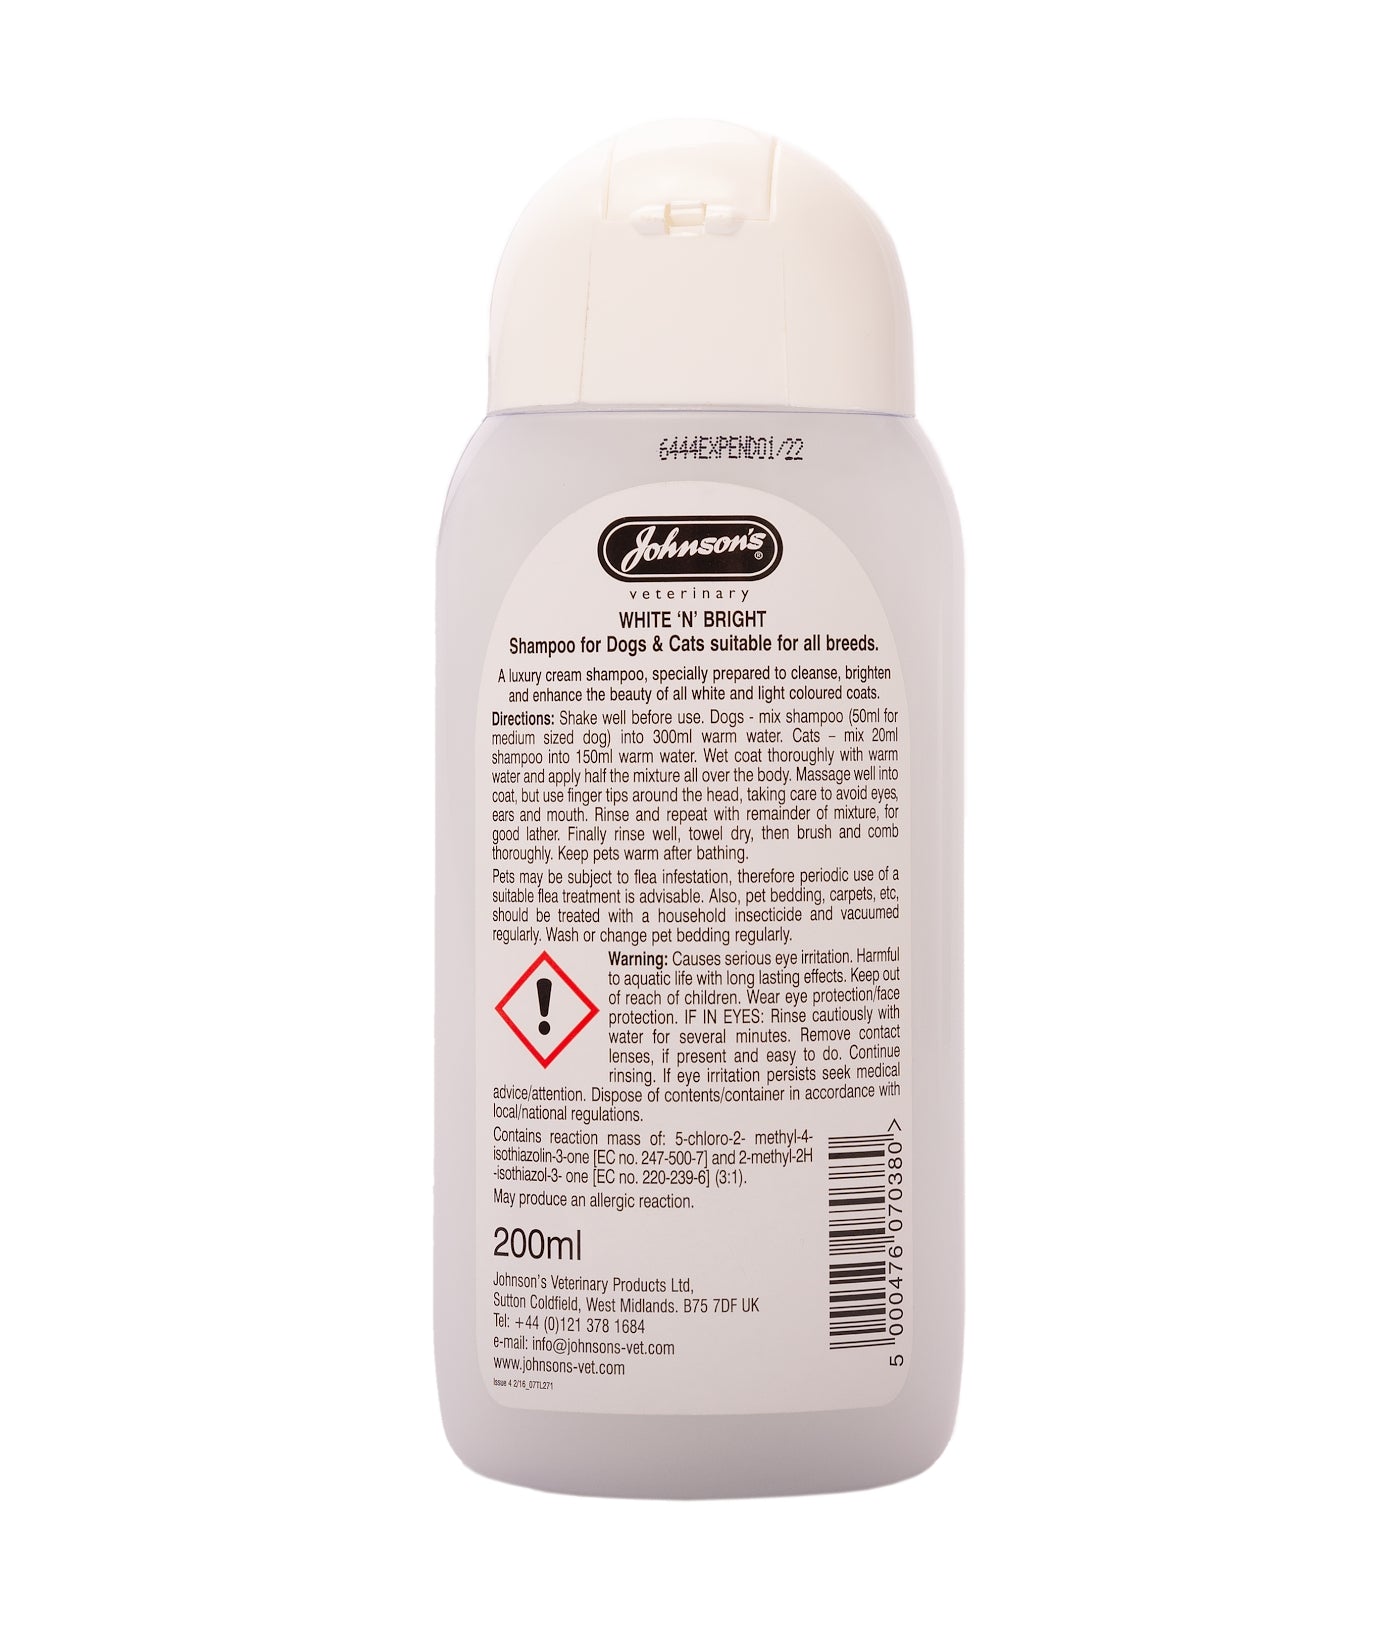 Johnson's - White 'n' Bright Shampoo for Dogs and Cats - 200ml